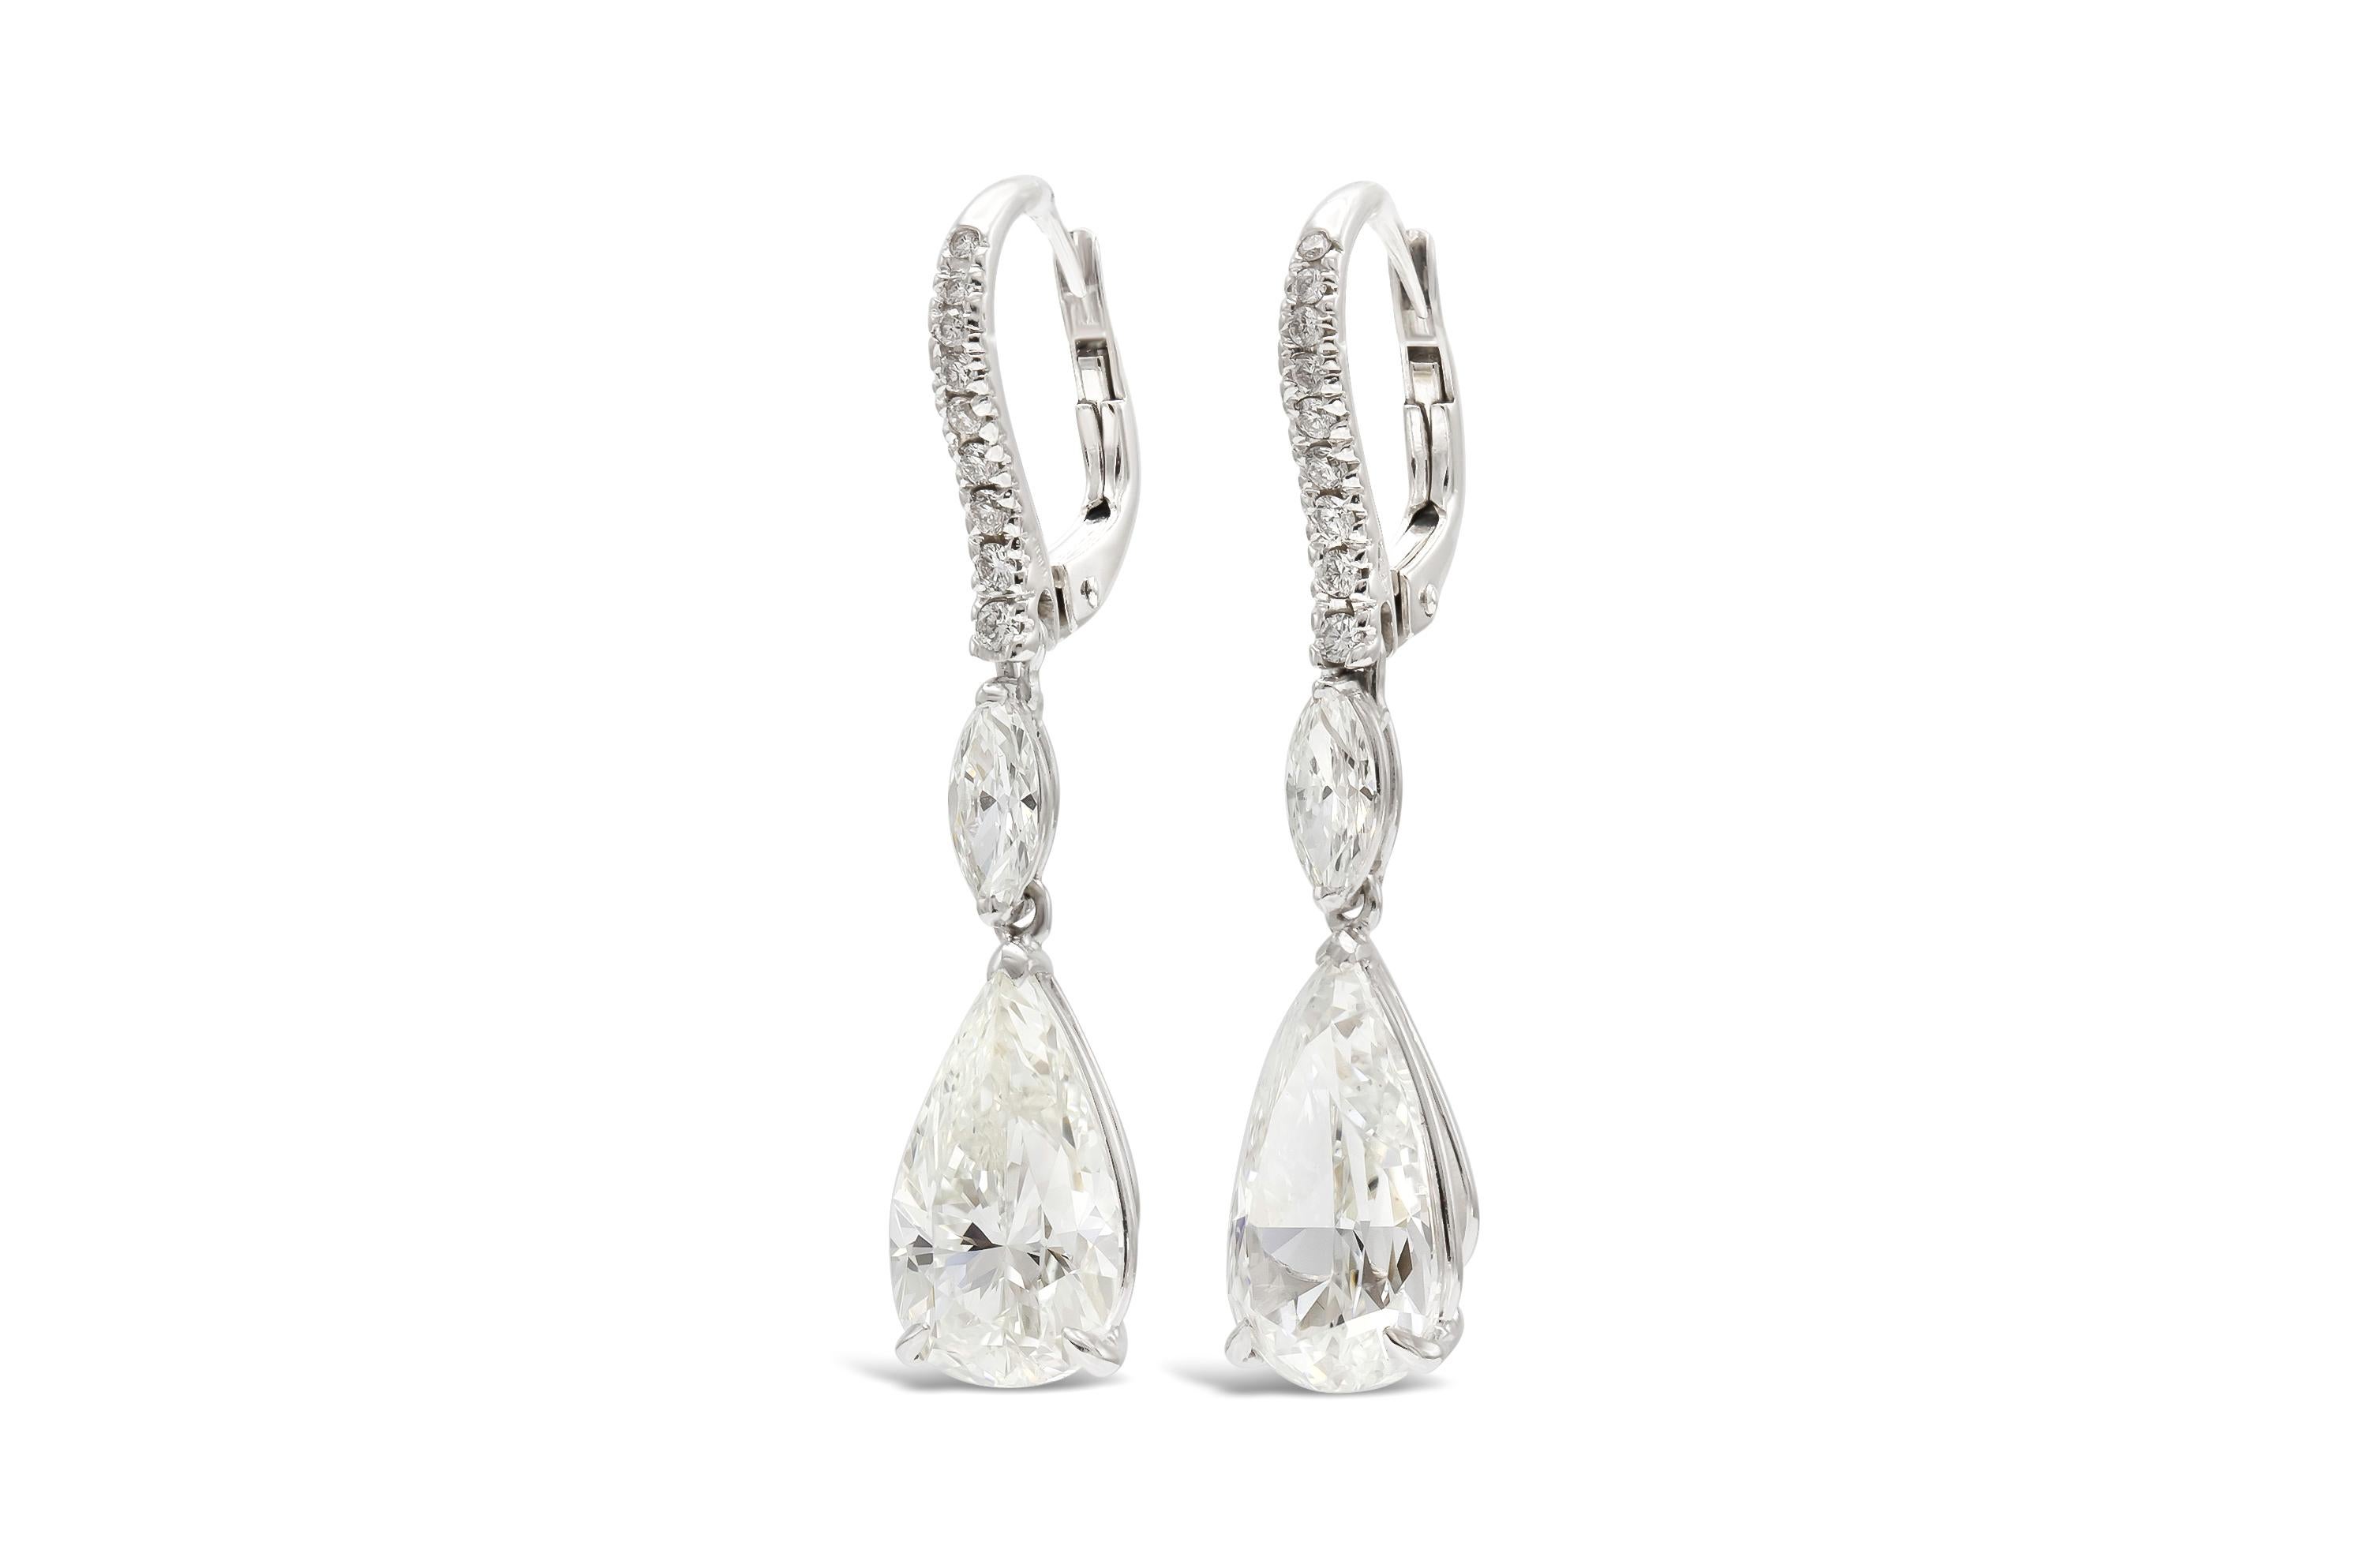 Finely crafted in 18k white gold with two GIA certified Pear Shaped diamonds.
One weights 3.00 carats, H color, SI2 clarity
GIA#2225366408
The other also weighs 3.00 carats, I color, SI1 clarity
GIA#6224366414
The earrings feature Marquise and Round